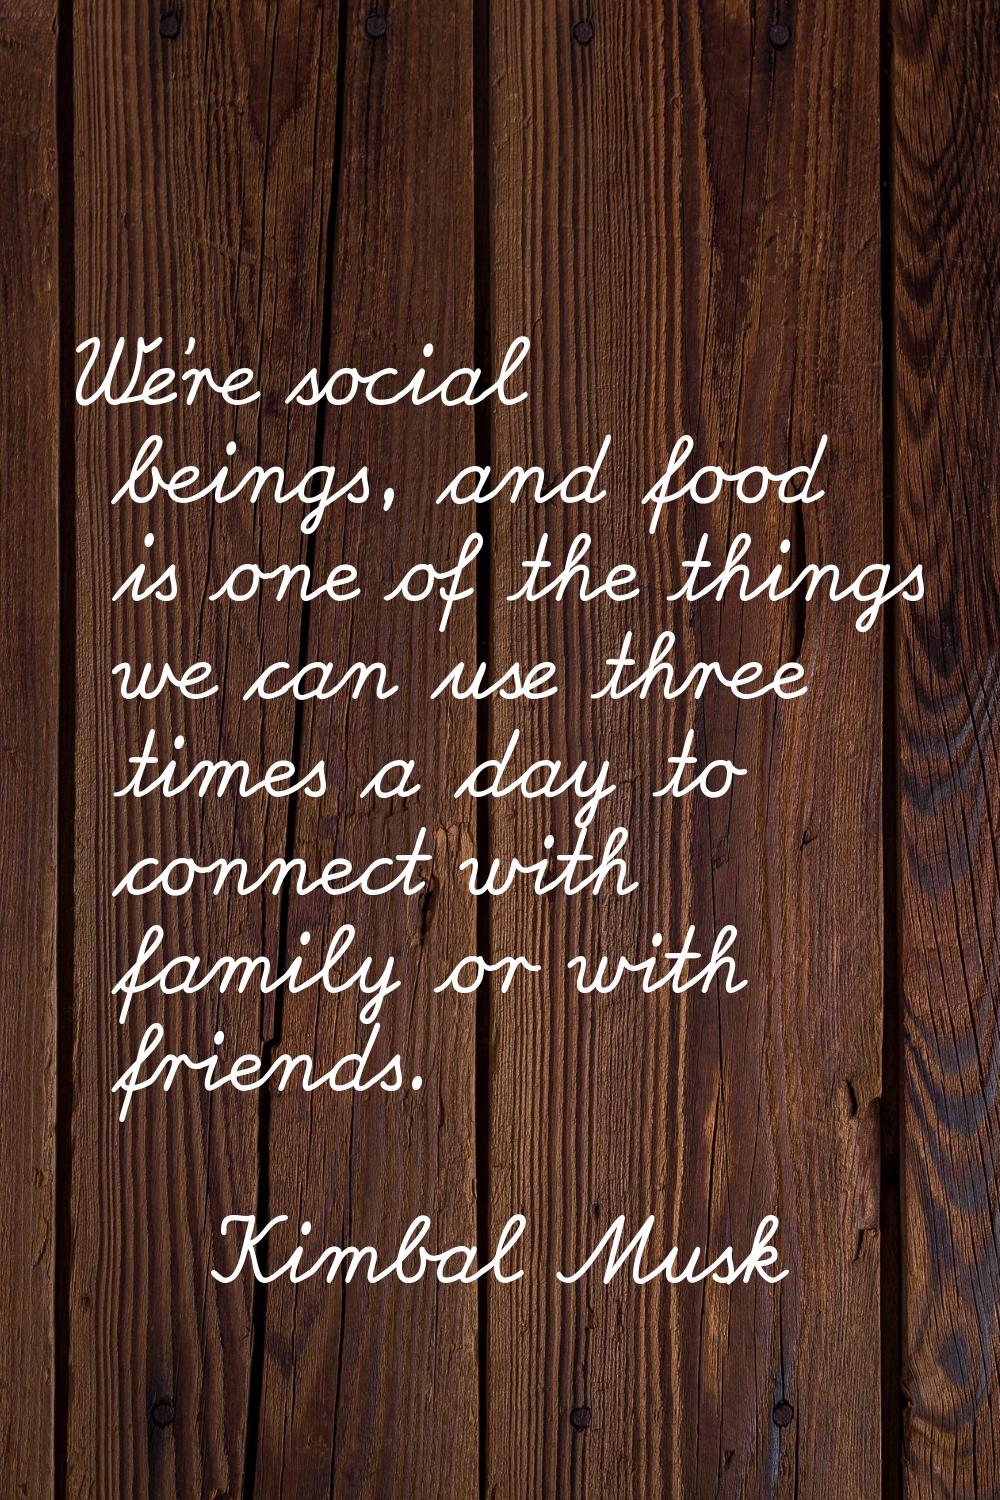 We're social beings, and food is one of the things we can use three times a day to connect with fam